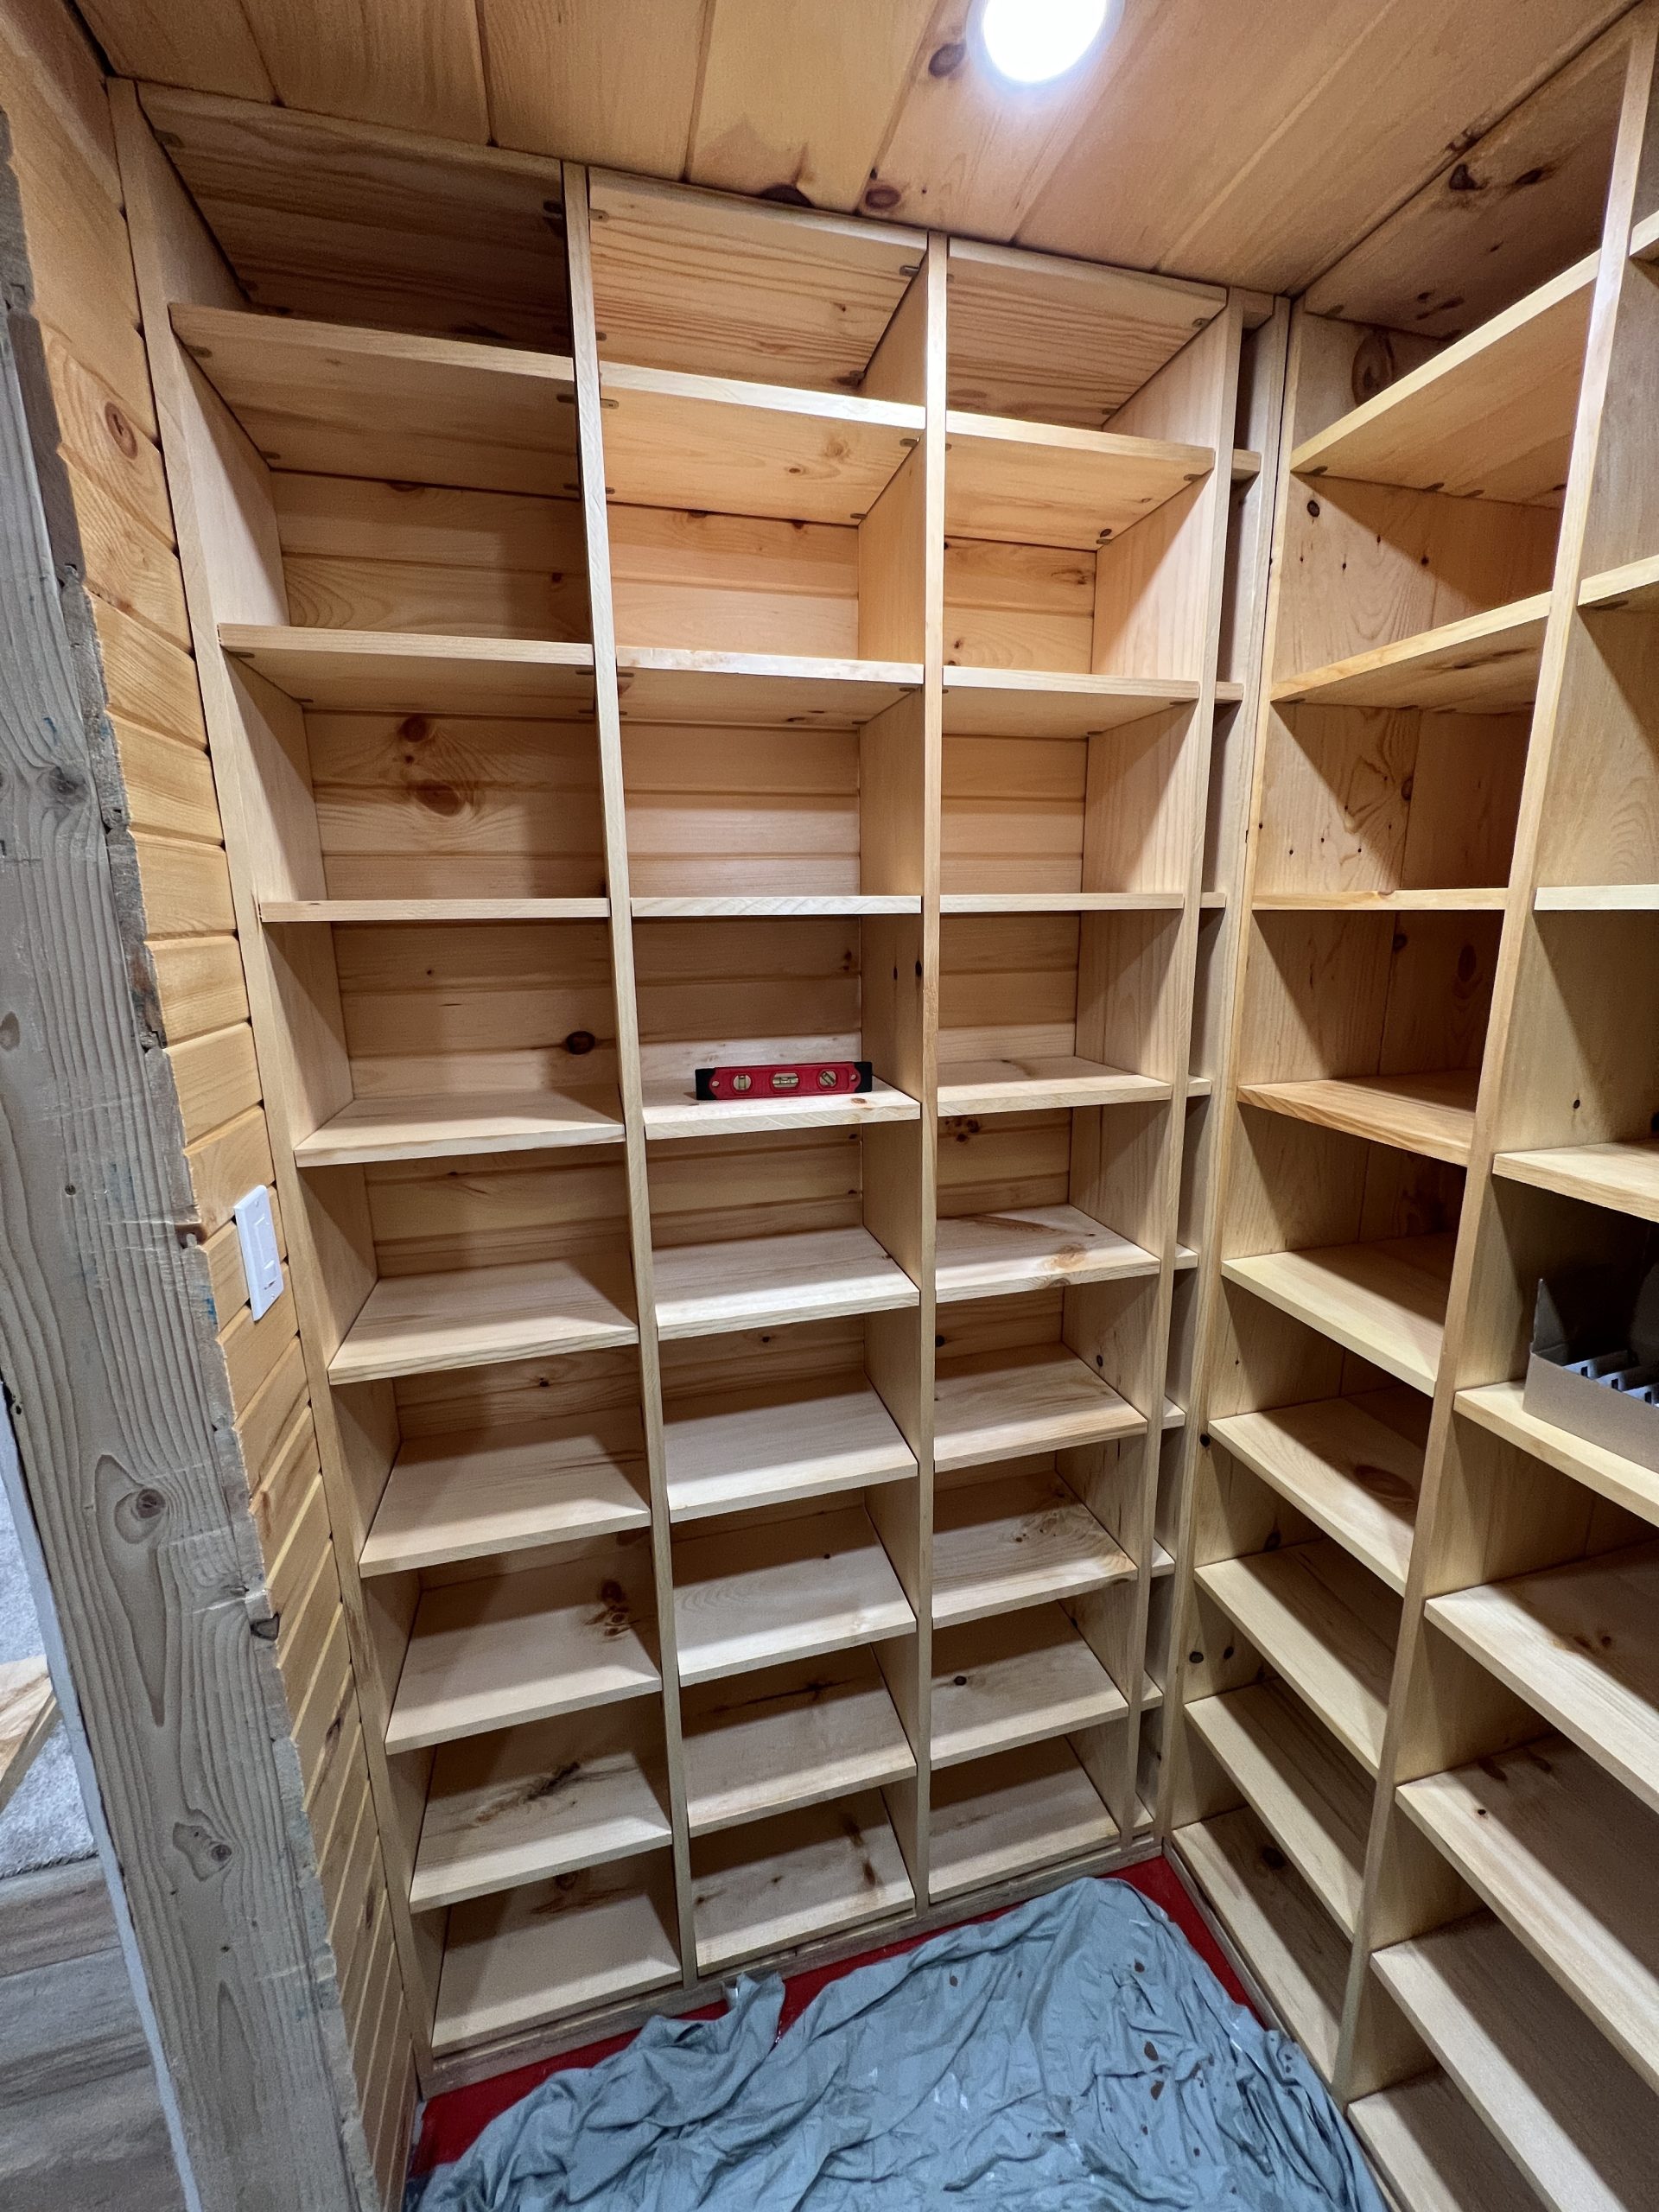 A head on view of the finished wall of wine bins. Each bin measures 13 inches wide by 9 inches tall by 10 inches deep. The wall of bins is three bins wide by 8 bins high.